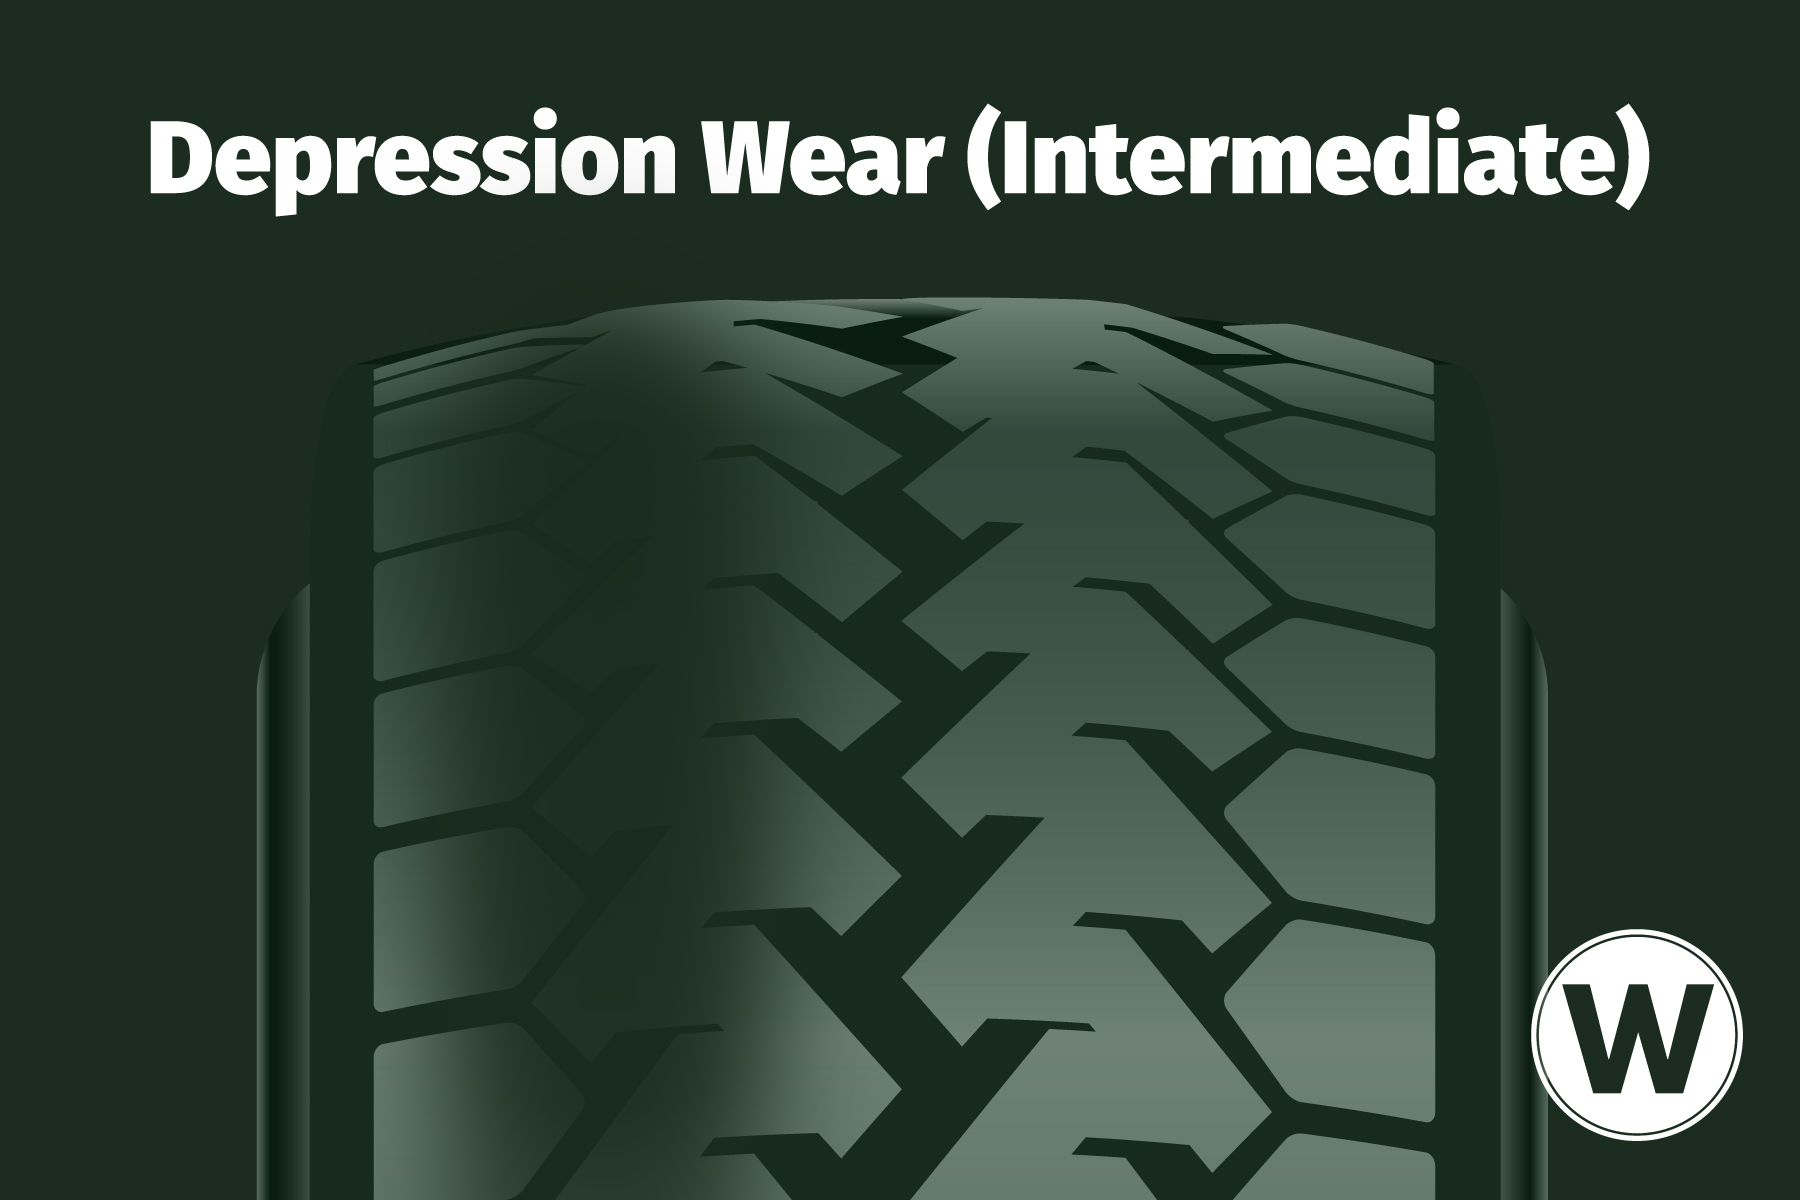 A wear pattern diagram that shows where to find depression wear (intermediate) on your commercial steer tires.